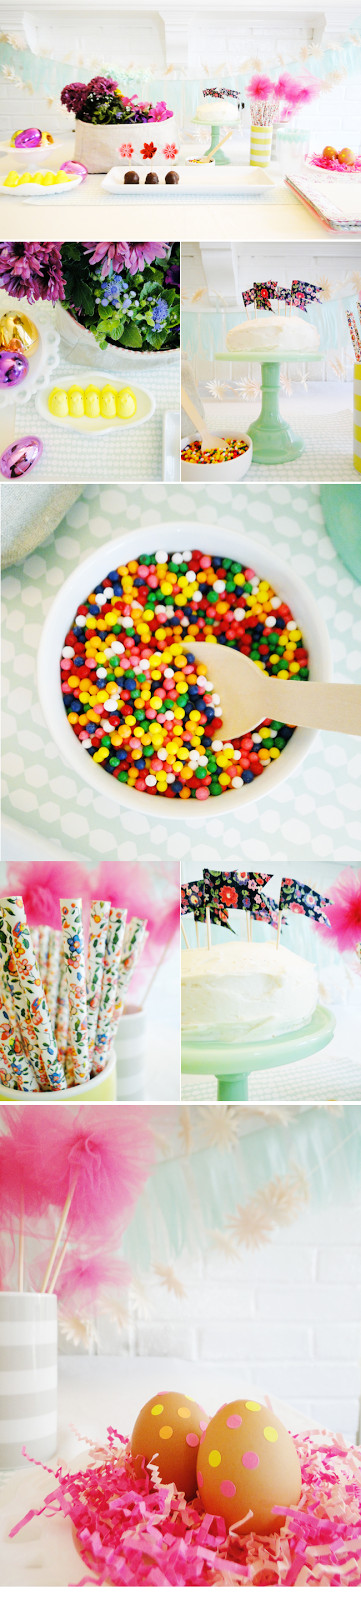 Easter Pinterest Ideas
 The Pink Doormat Easter Party Ideas on Pinterest